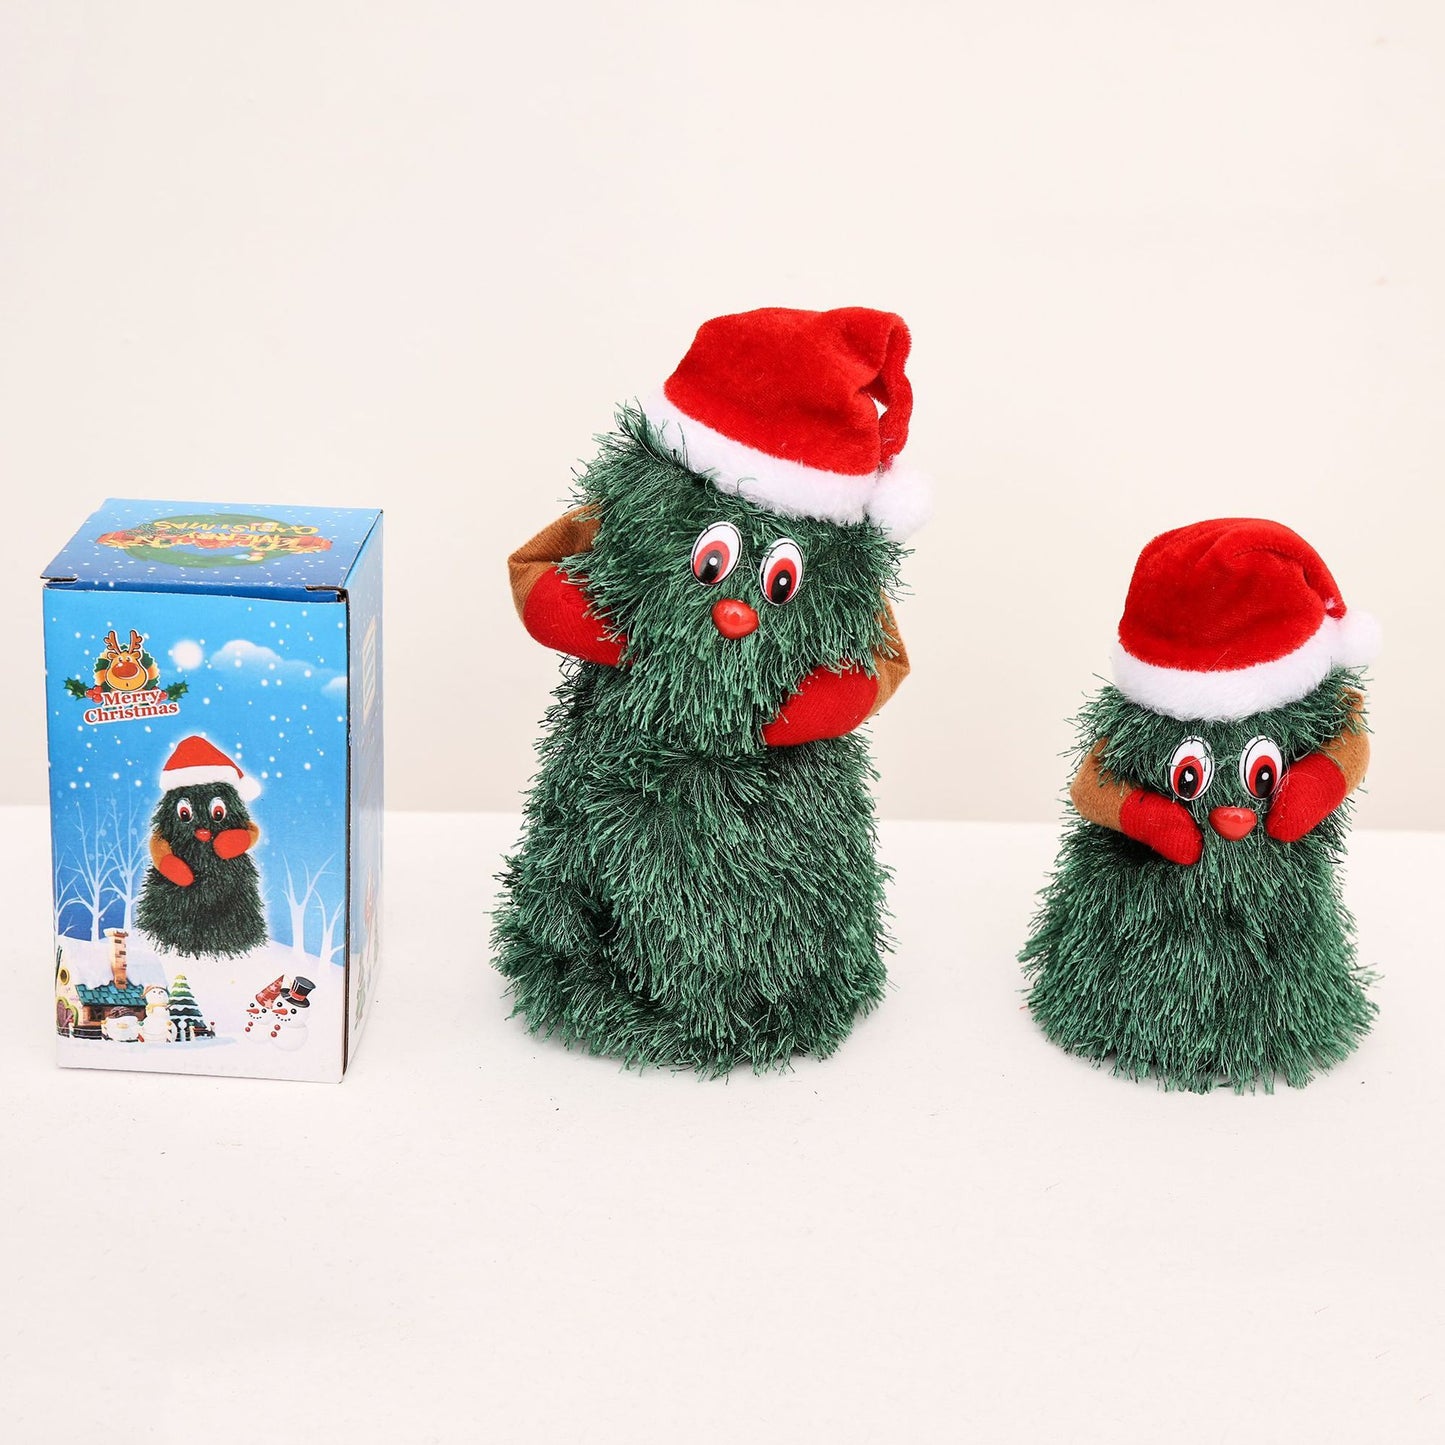 New Electric Toy Electric Plush Toy Doll Funny Cute Green Electronic Xmas Tree Musical Santa Claus Fun Toy Christmas Decoration